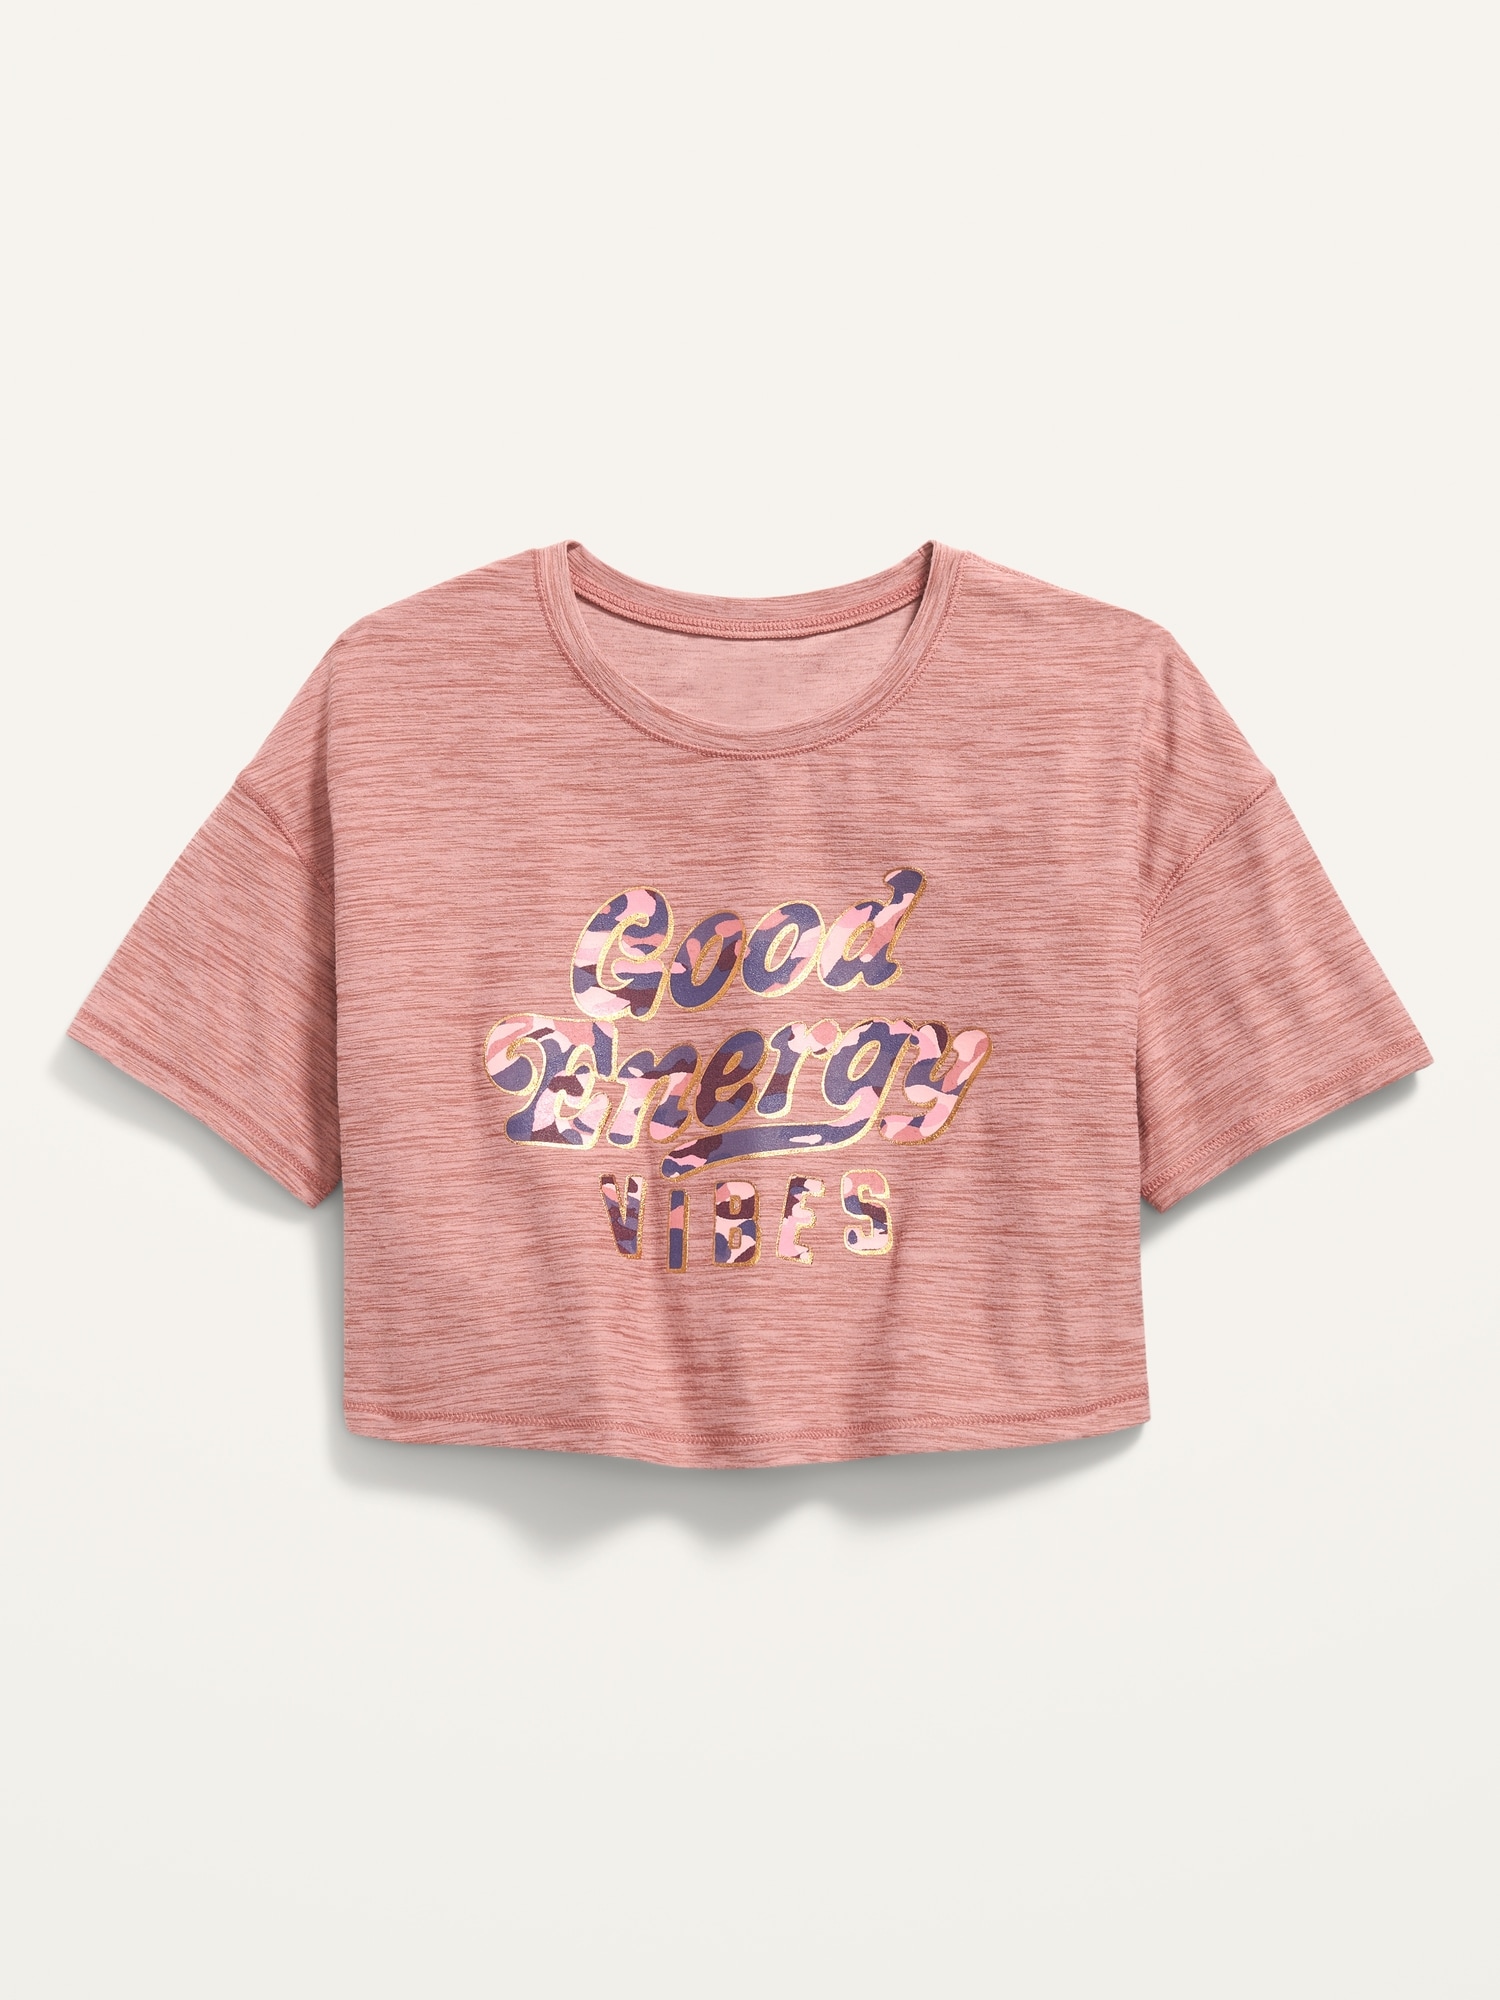 breathe-on-cropped-graphic-t-shirt-for-girls-old-navy